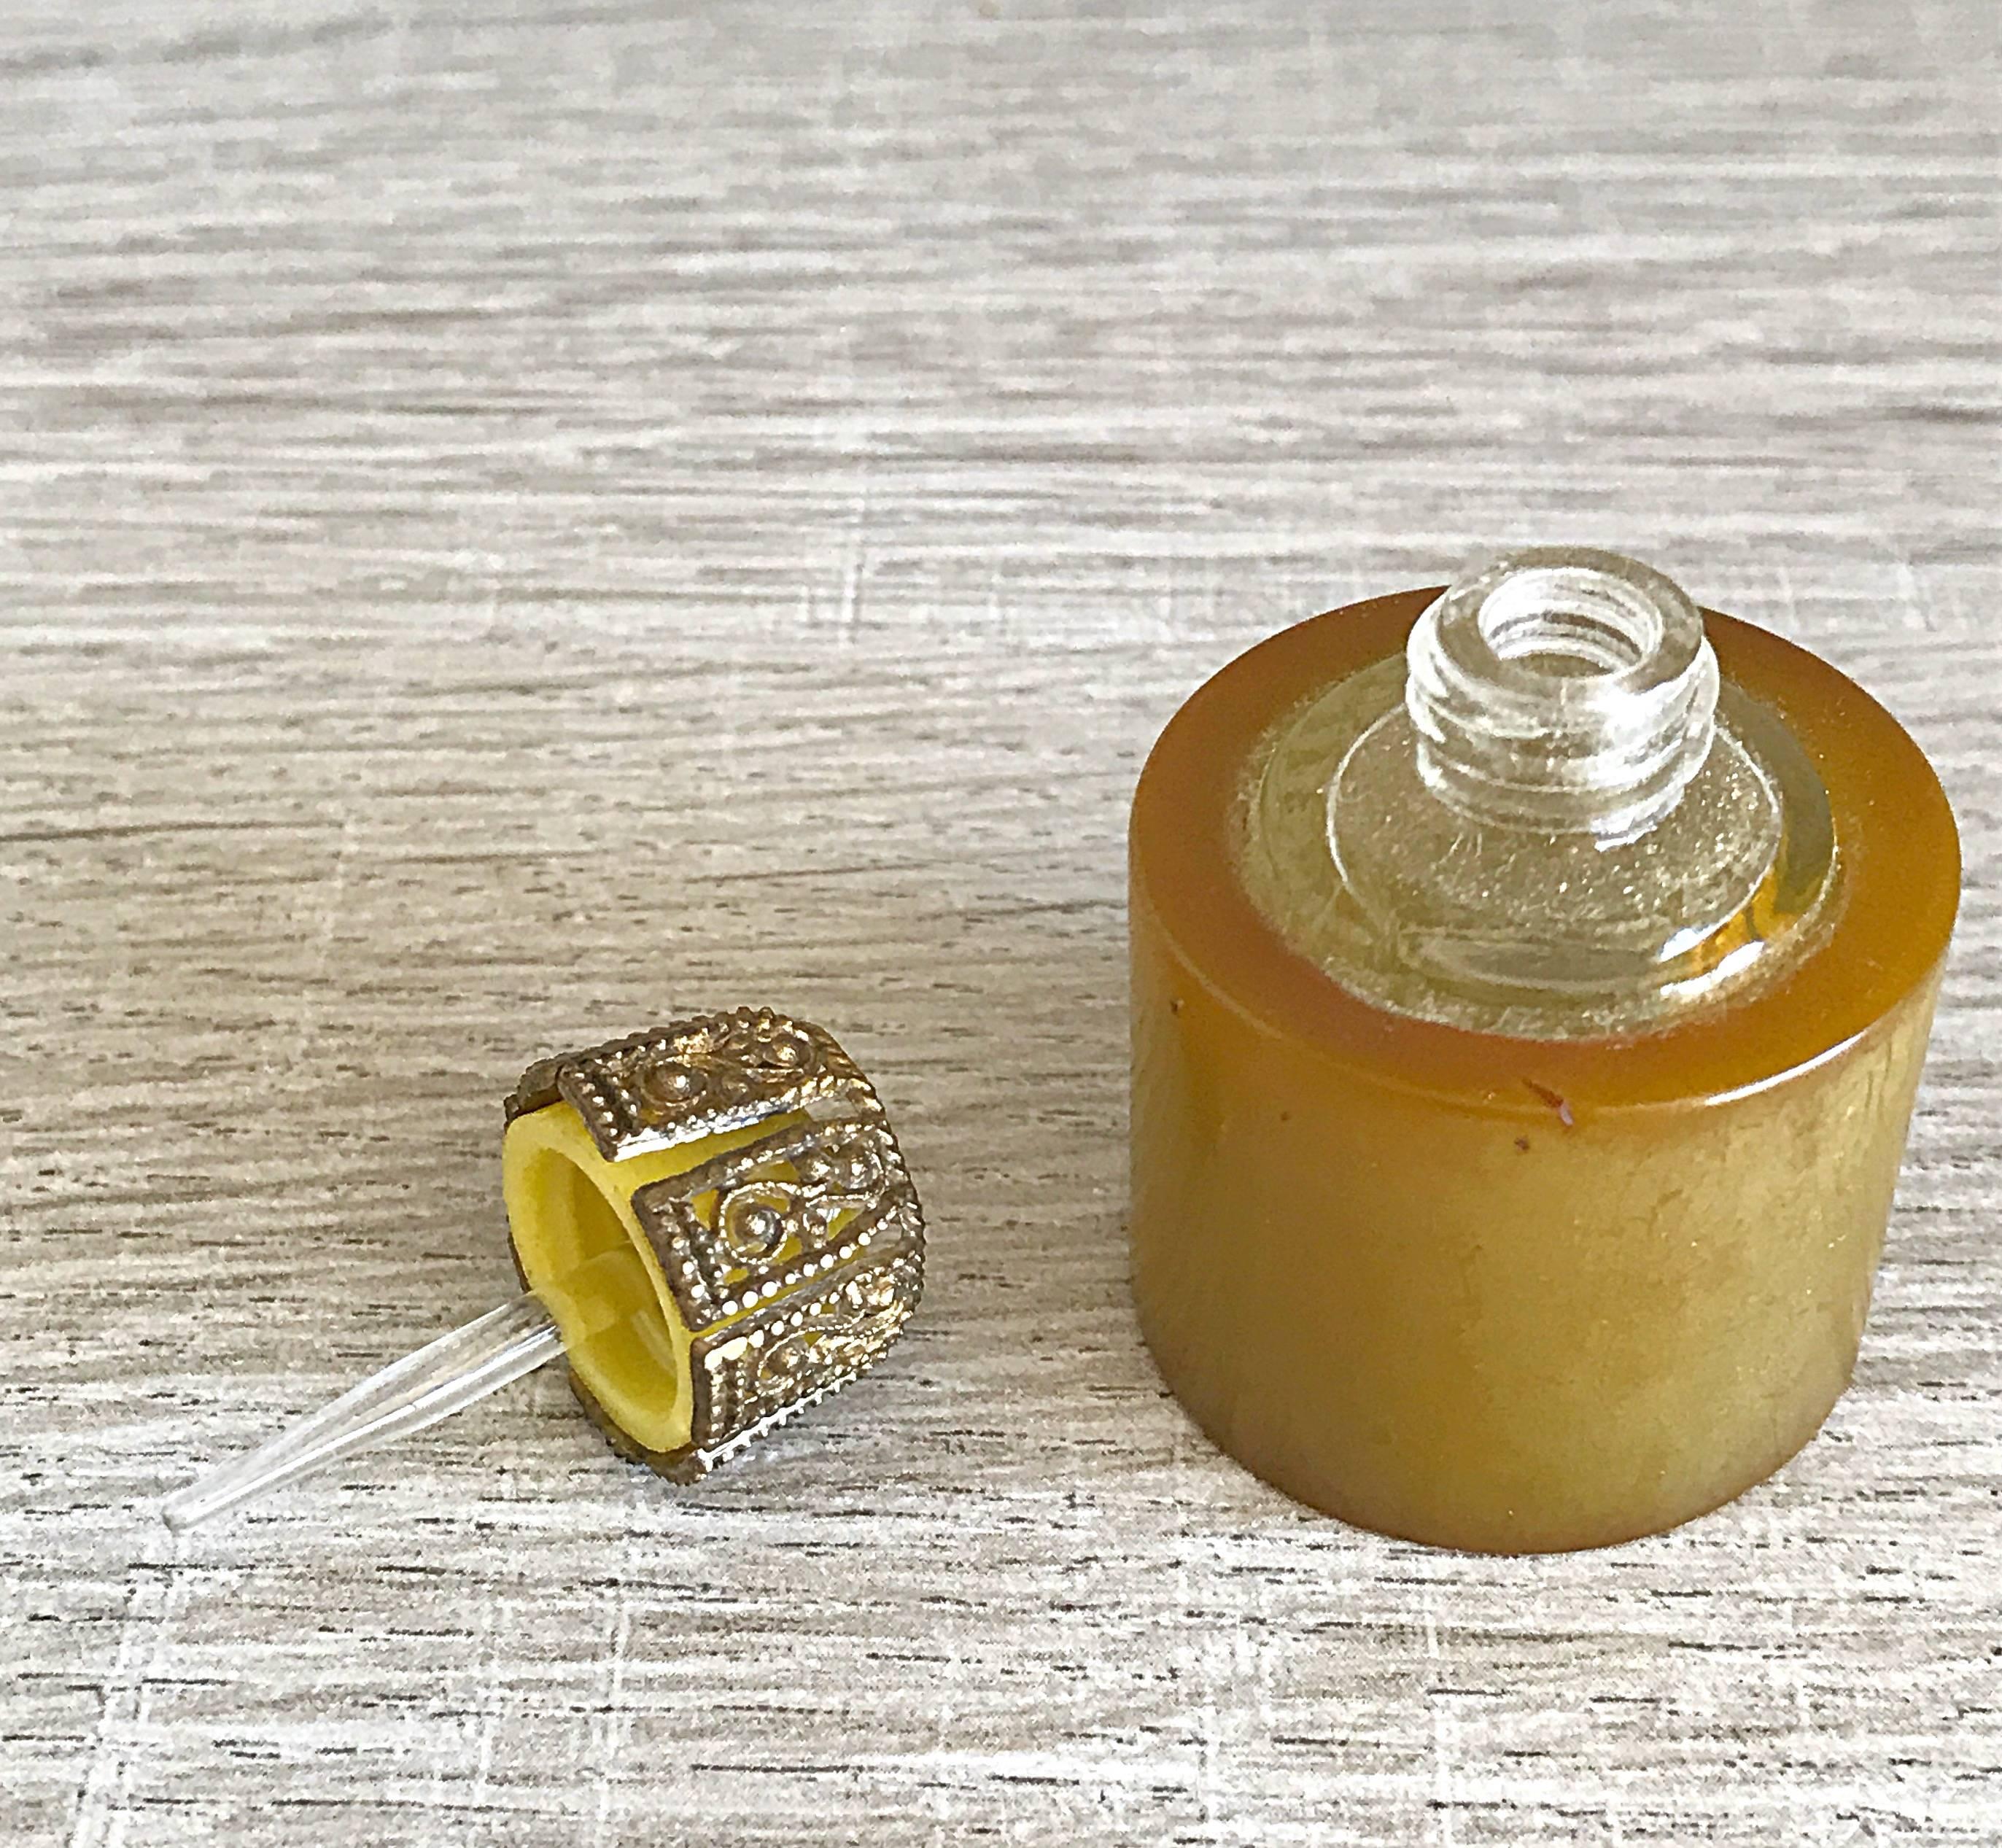 Rare vintage 30s Bakelite butterscotch / amber colored perfume holder and dauber! Perfect travel size that easily fits in any purse / hand bag. Screw caps shuts securely, and features a dauber to brush across the wrists and neck. Decorative gold /